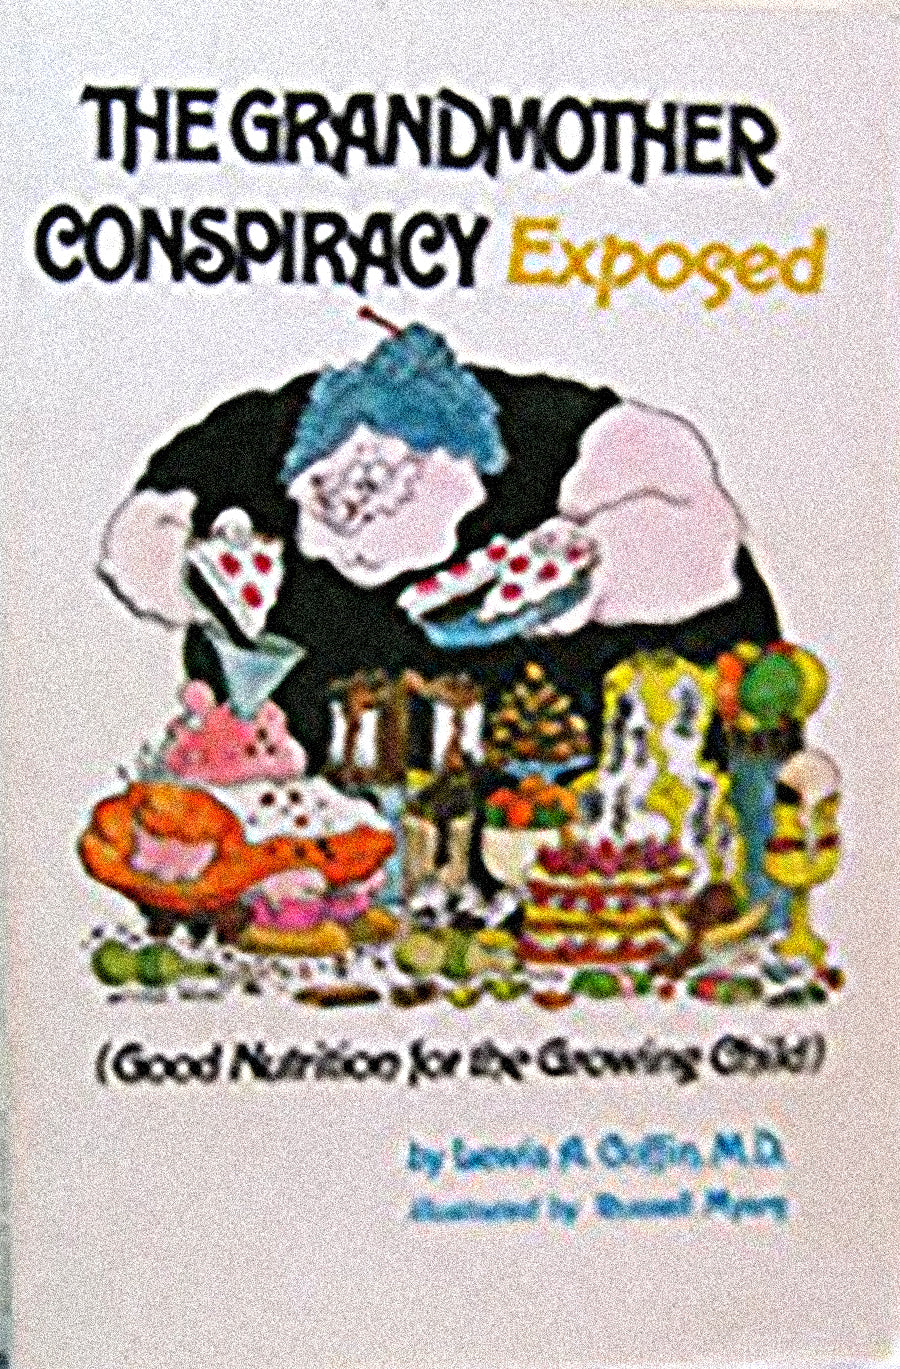 The Grandmother Conspiracy Exposed by Lewis A. Coffin